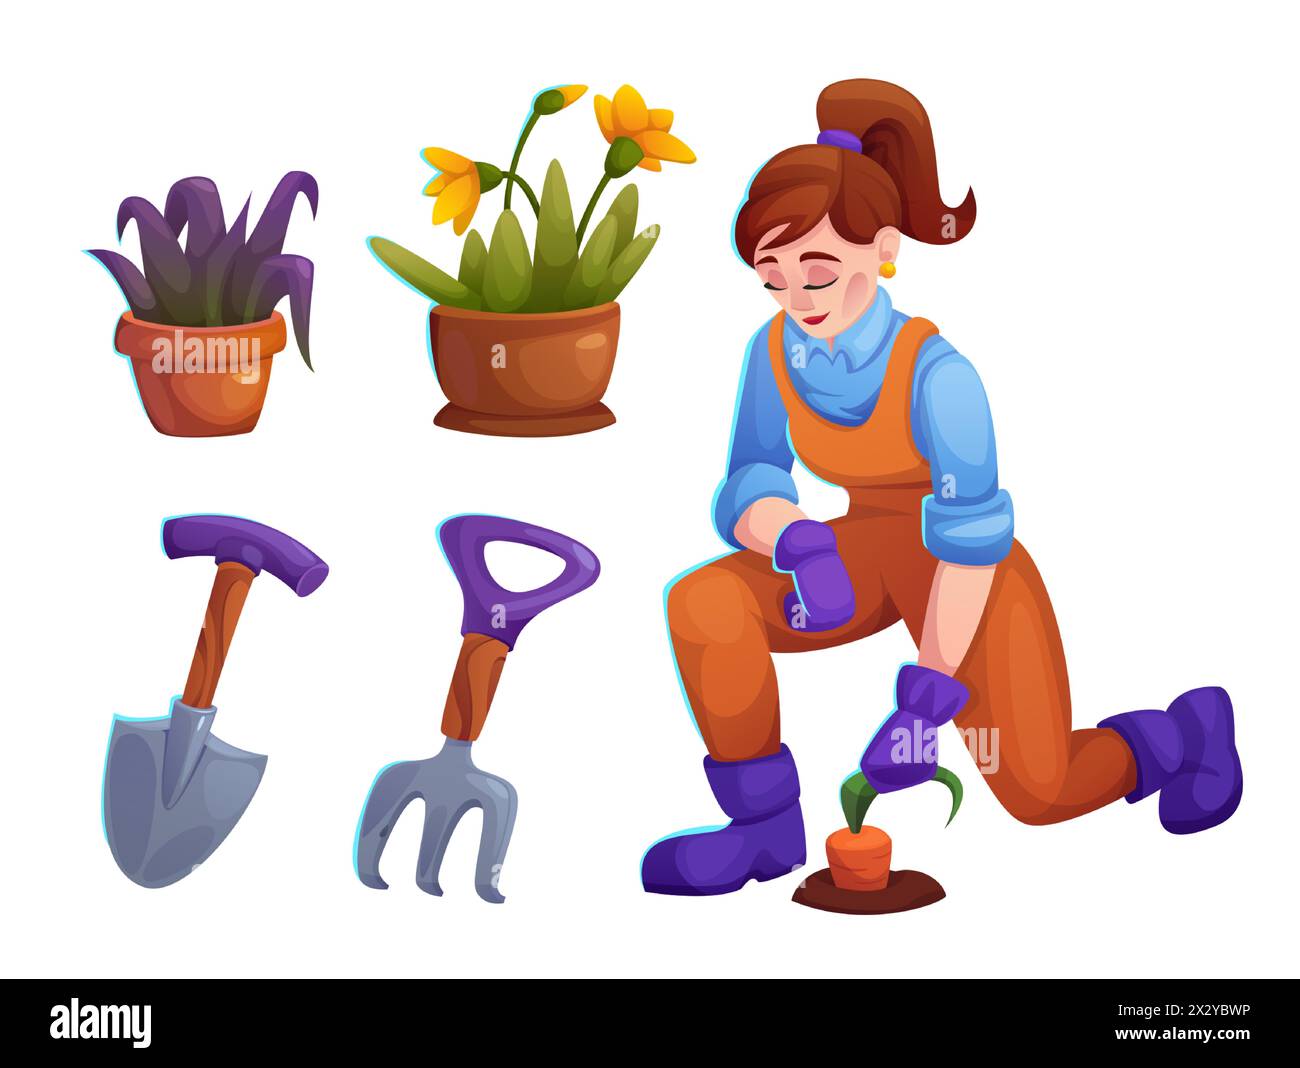 Woman with garden flower plant in pot illustration. Lady planter care vegetable and flowerpot as hobby. Female gardner with shovel and rake equipment set. Botanical career and farming work cartoon Stock Vector